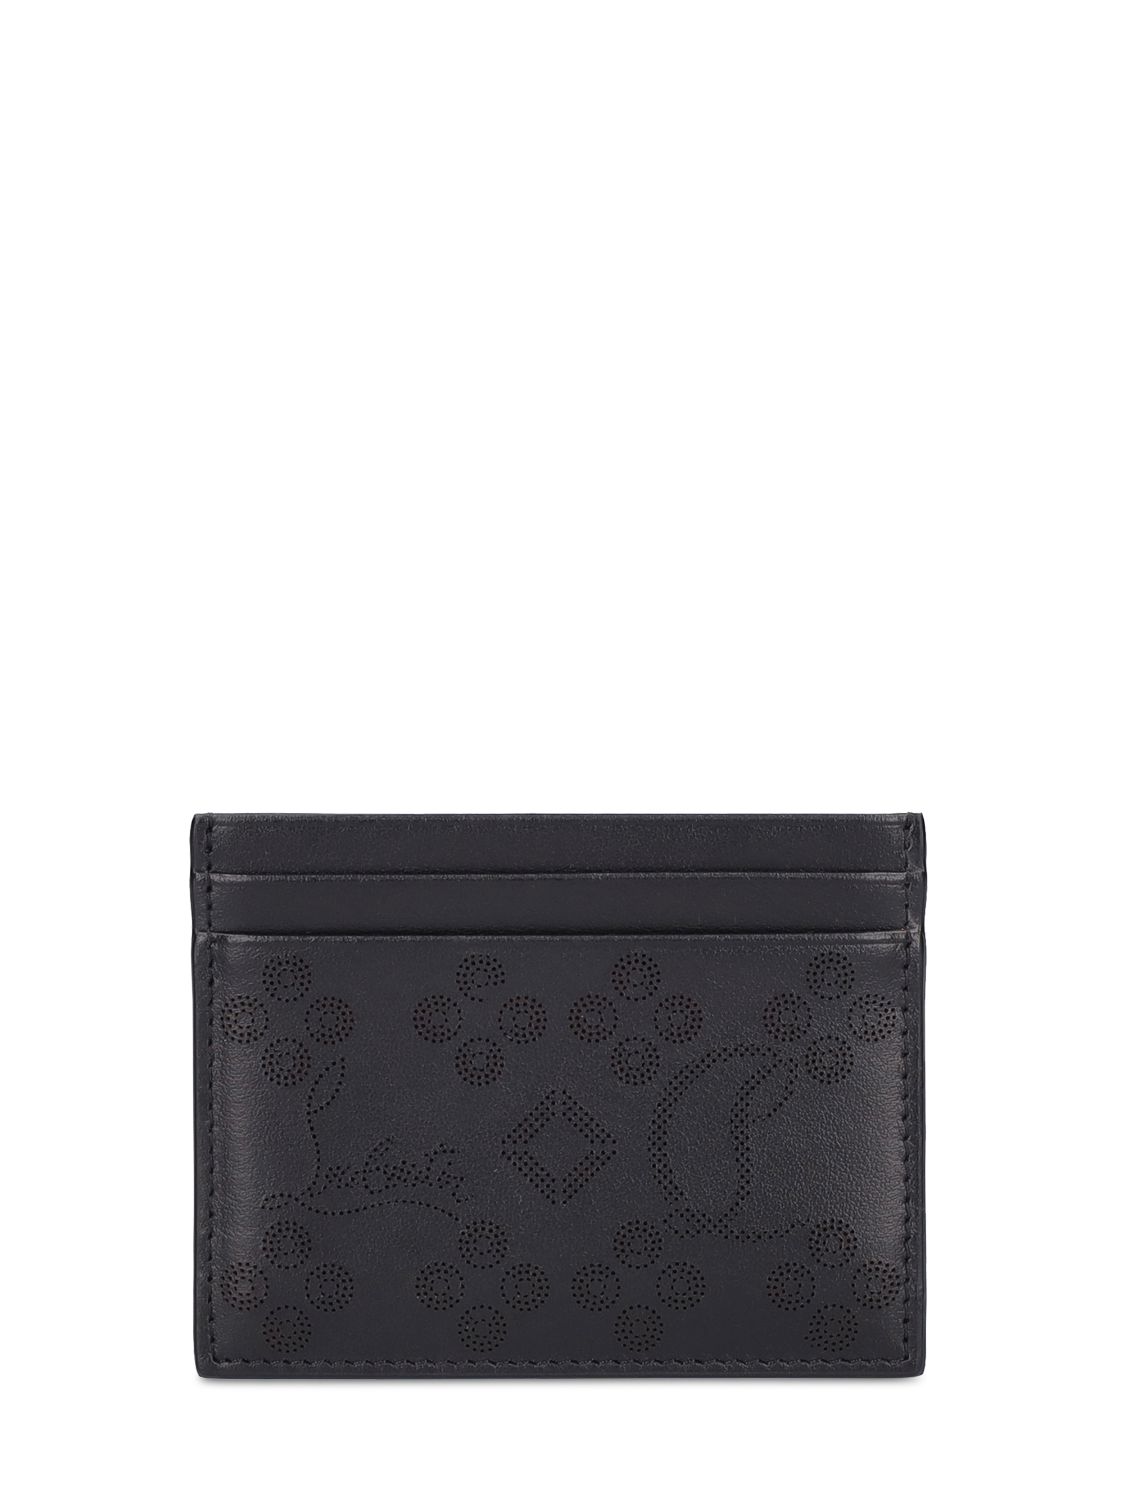 W Kios Perforated Leather Card Holder